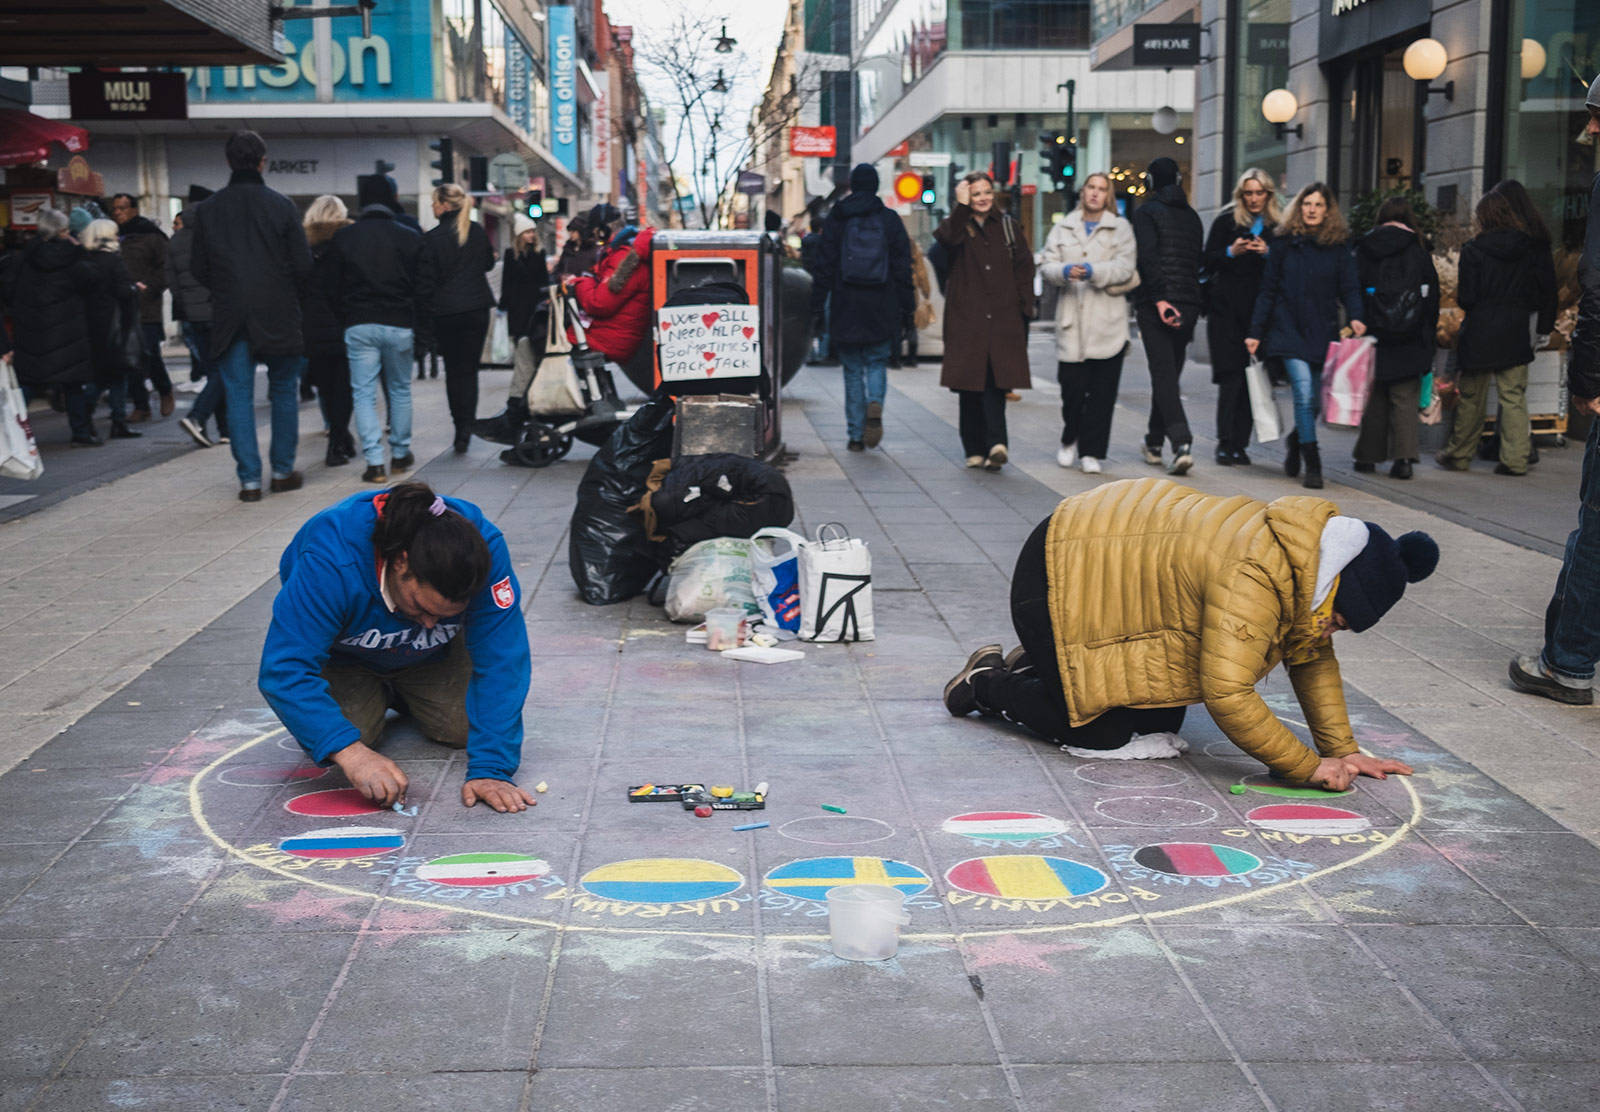 Men drawing with chalk on pavement